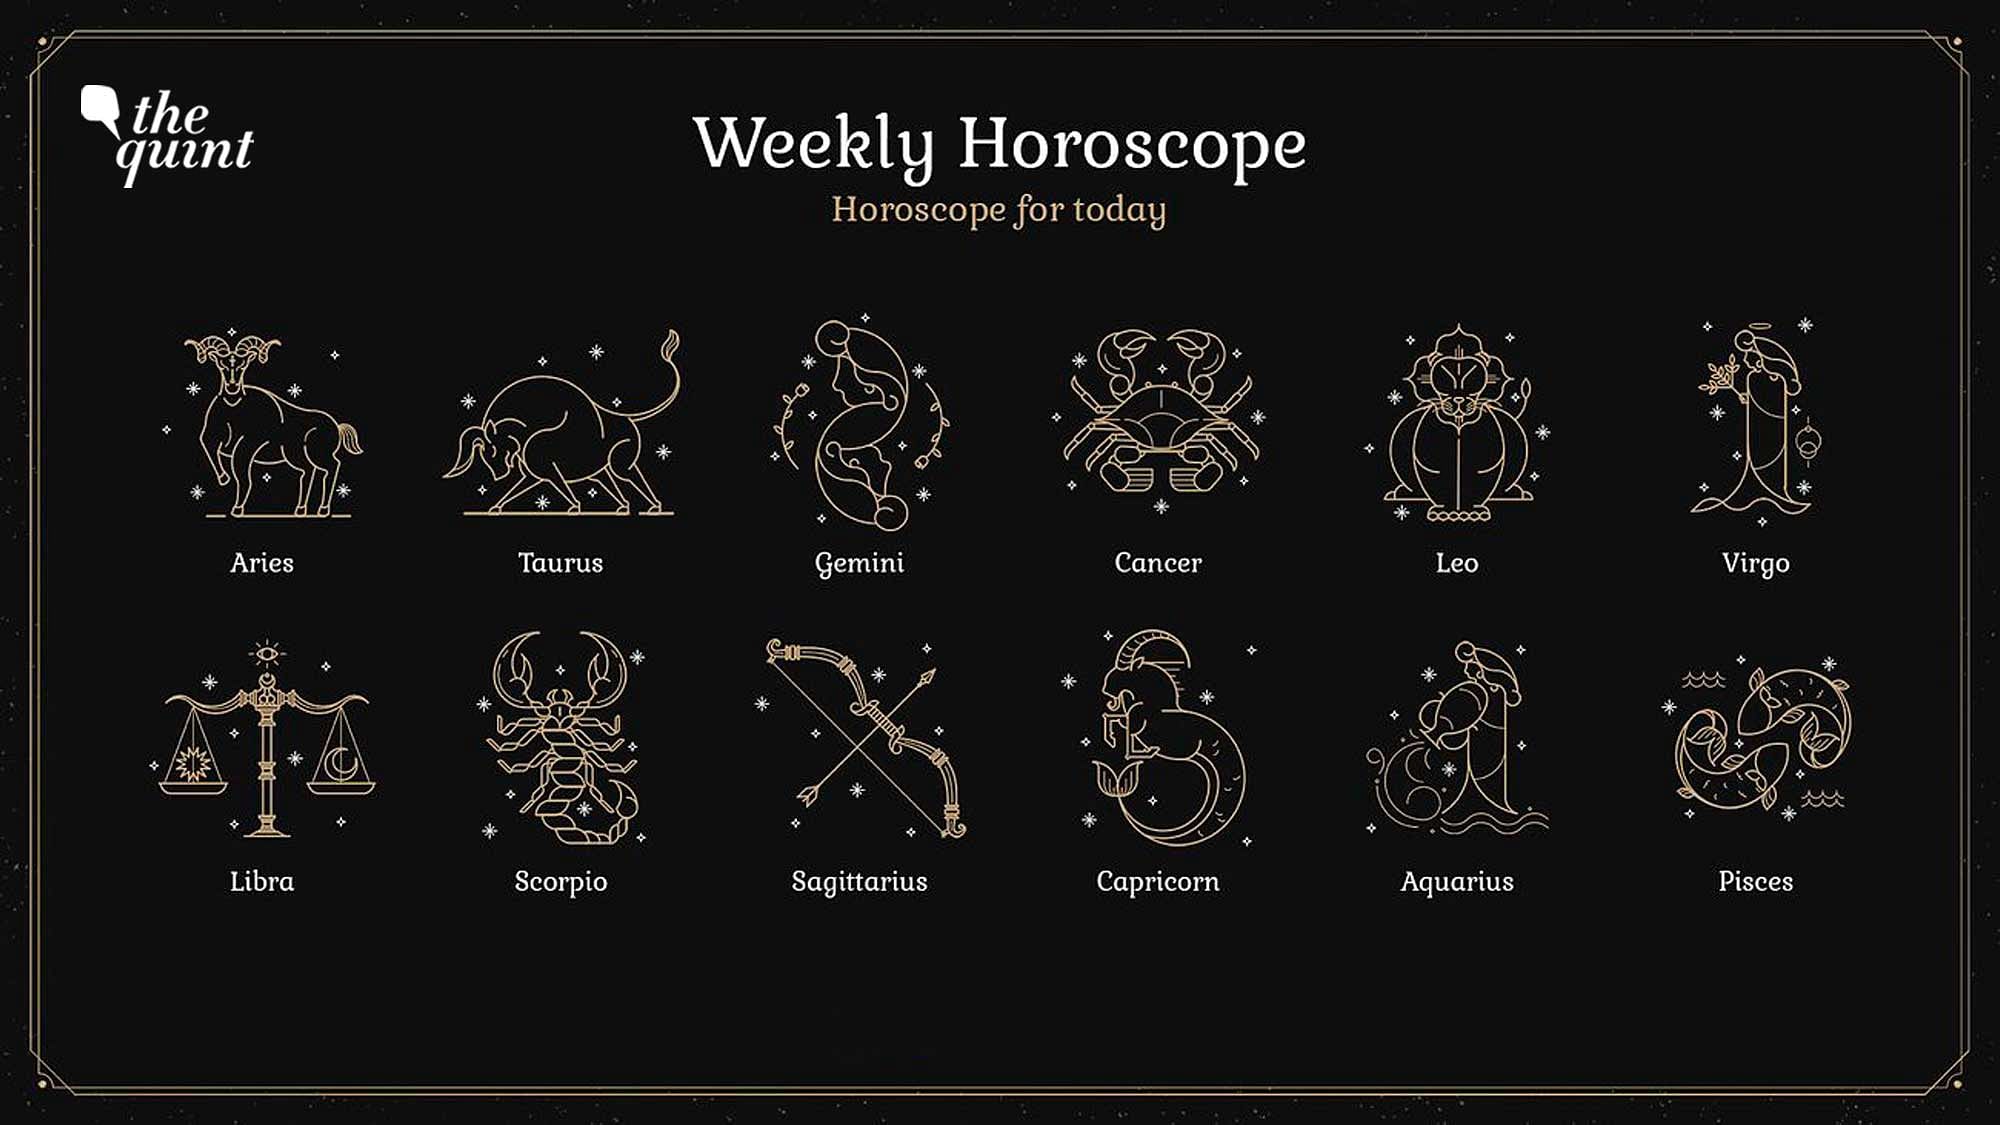 <div class="paragraphs"><p>Know the weekly horoscopes for your sun sign below.</p></div>